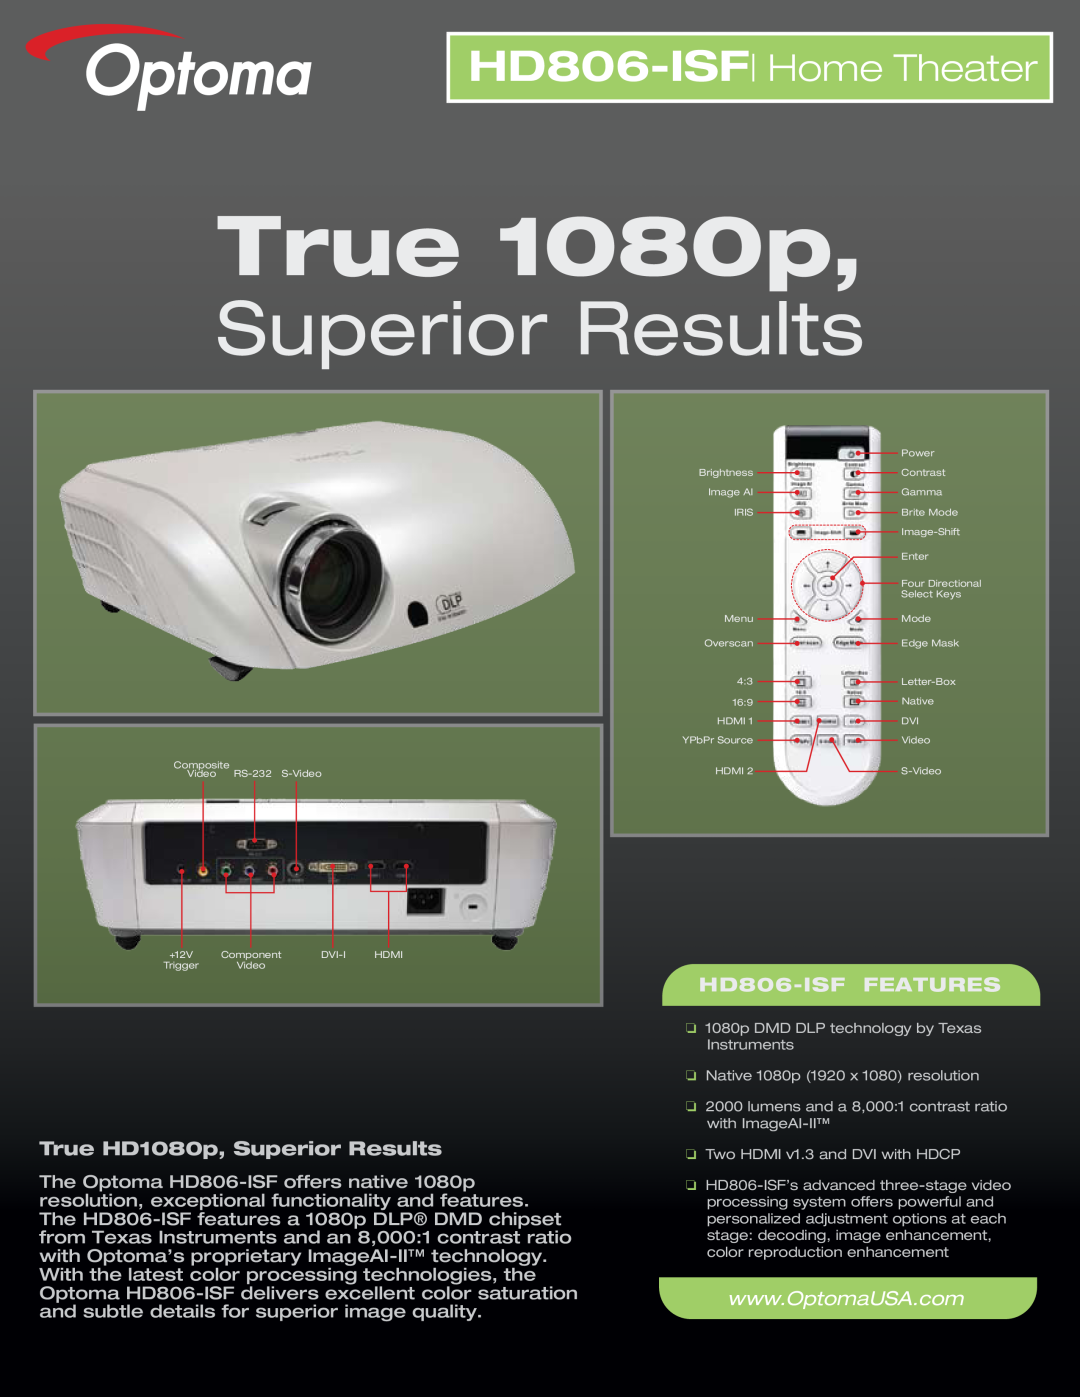 Optoma Technology manual HD806-ISF Home Theater, True 1080p, True HD1080p, Superior Results, HD806-ISF FEATURES 